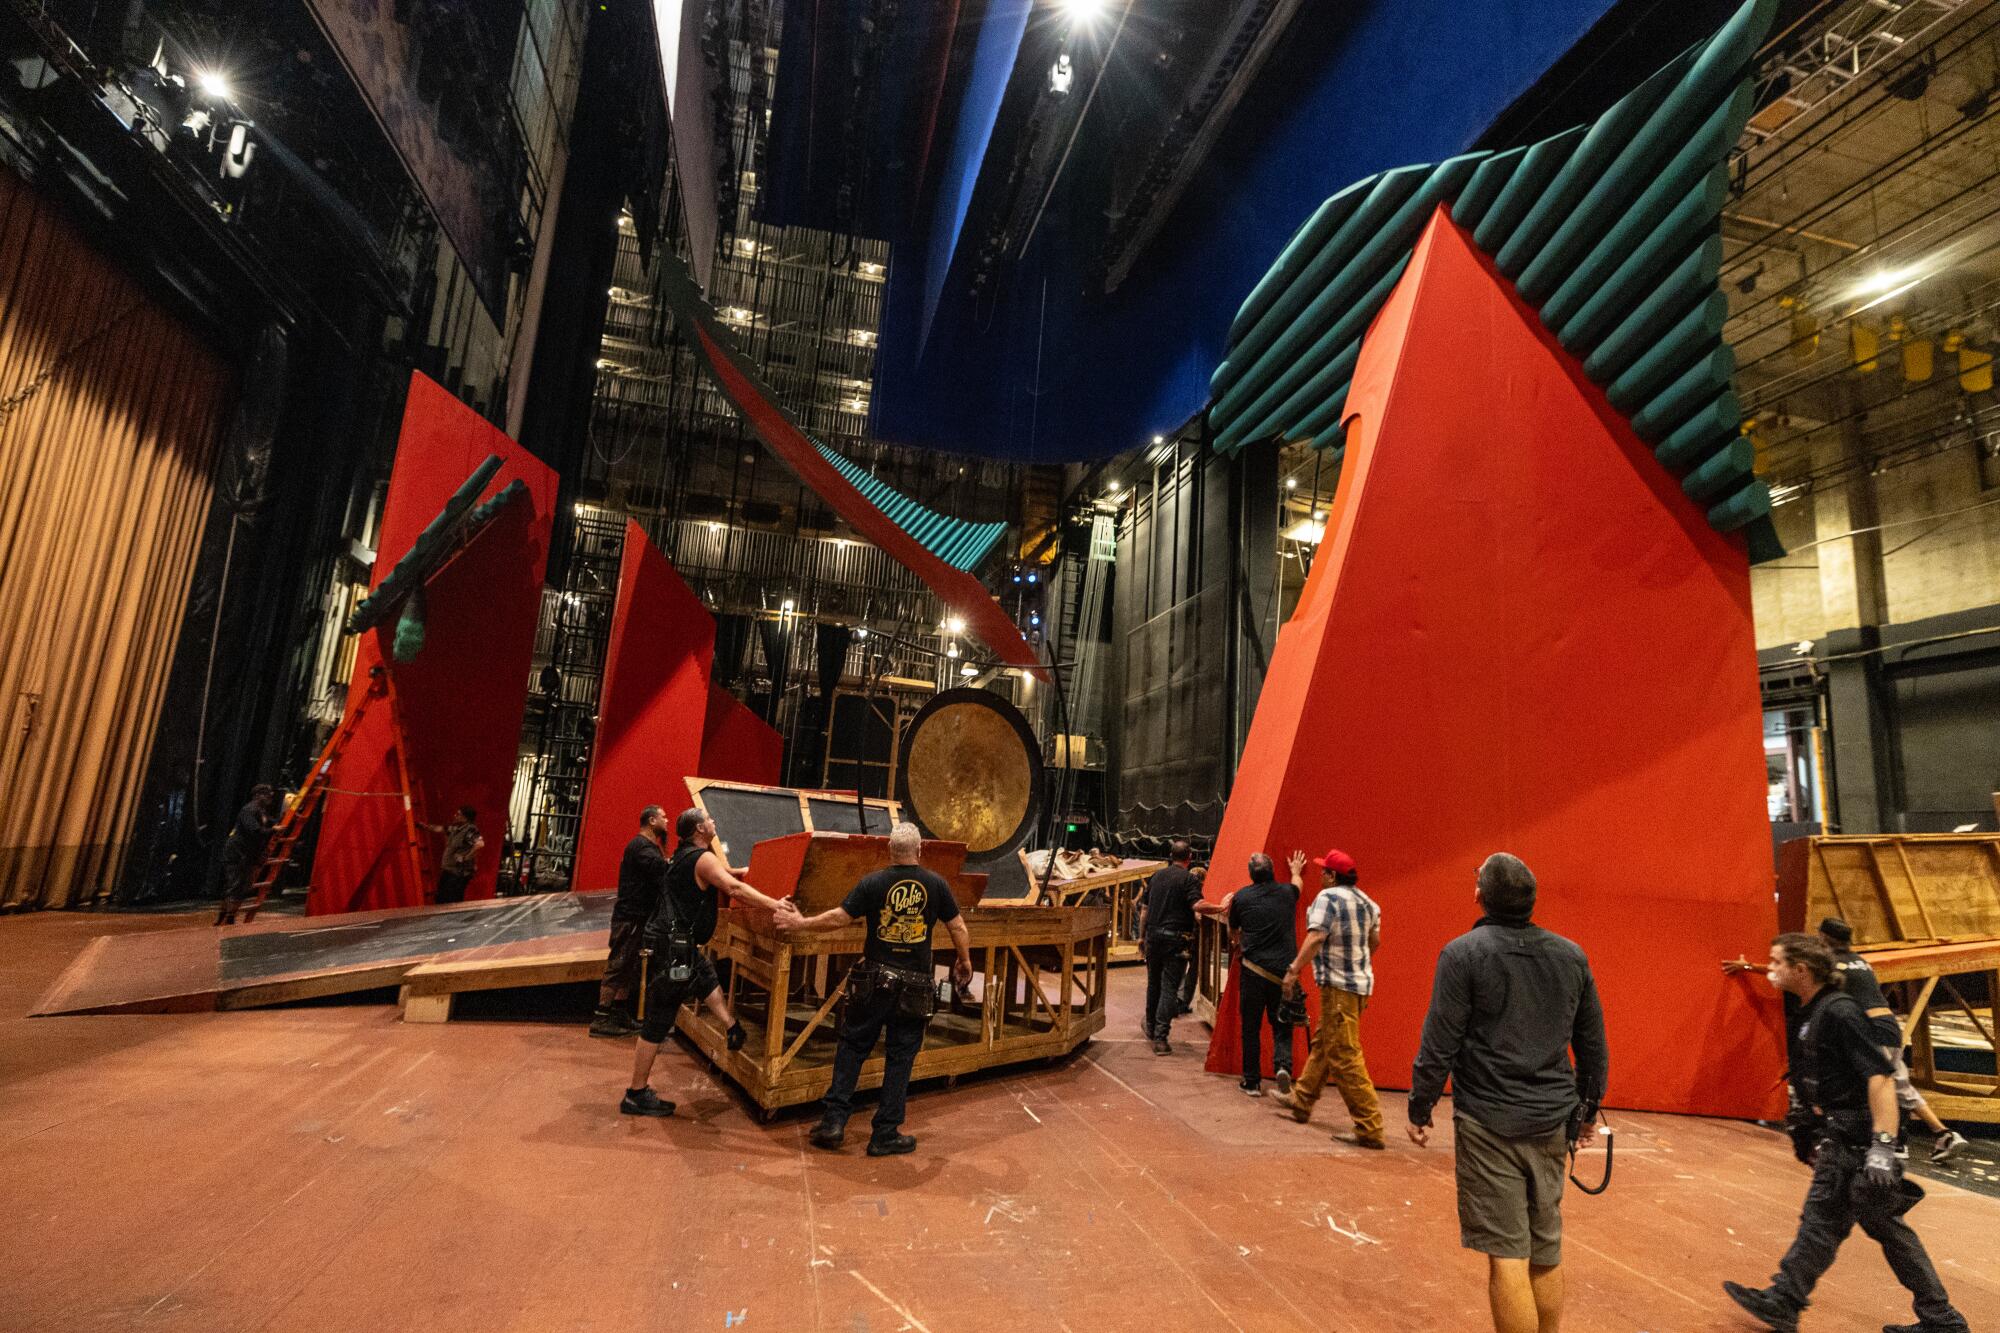 Workers move giant "Turandot" set pieces backstage for the second act during a rehearsal.